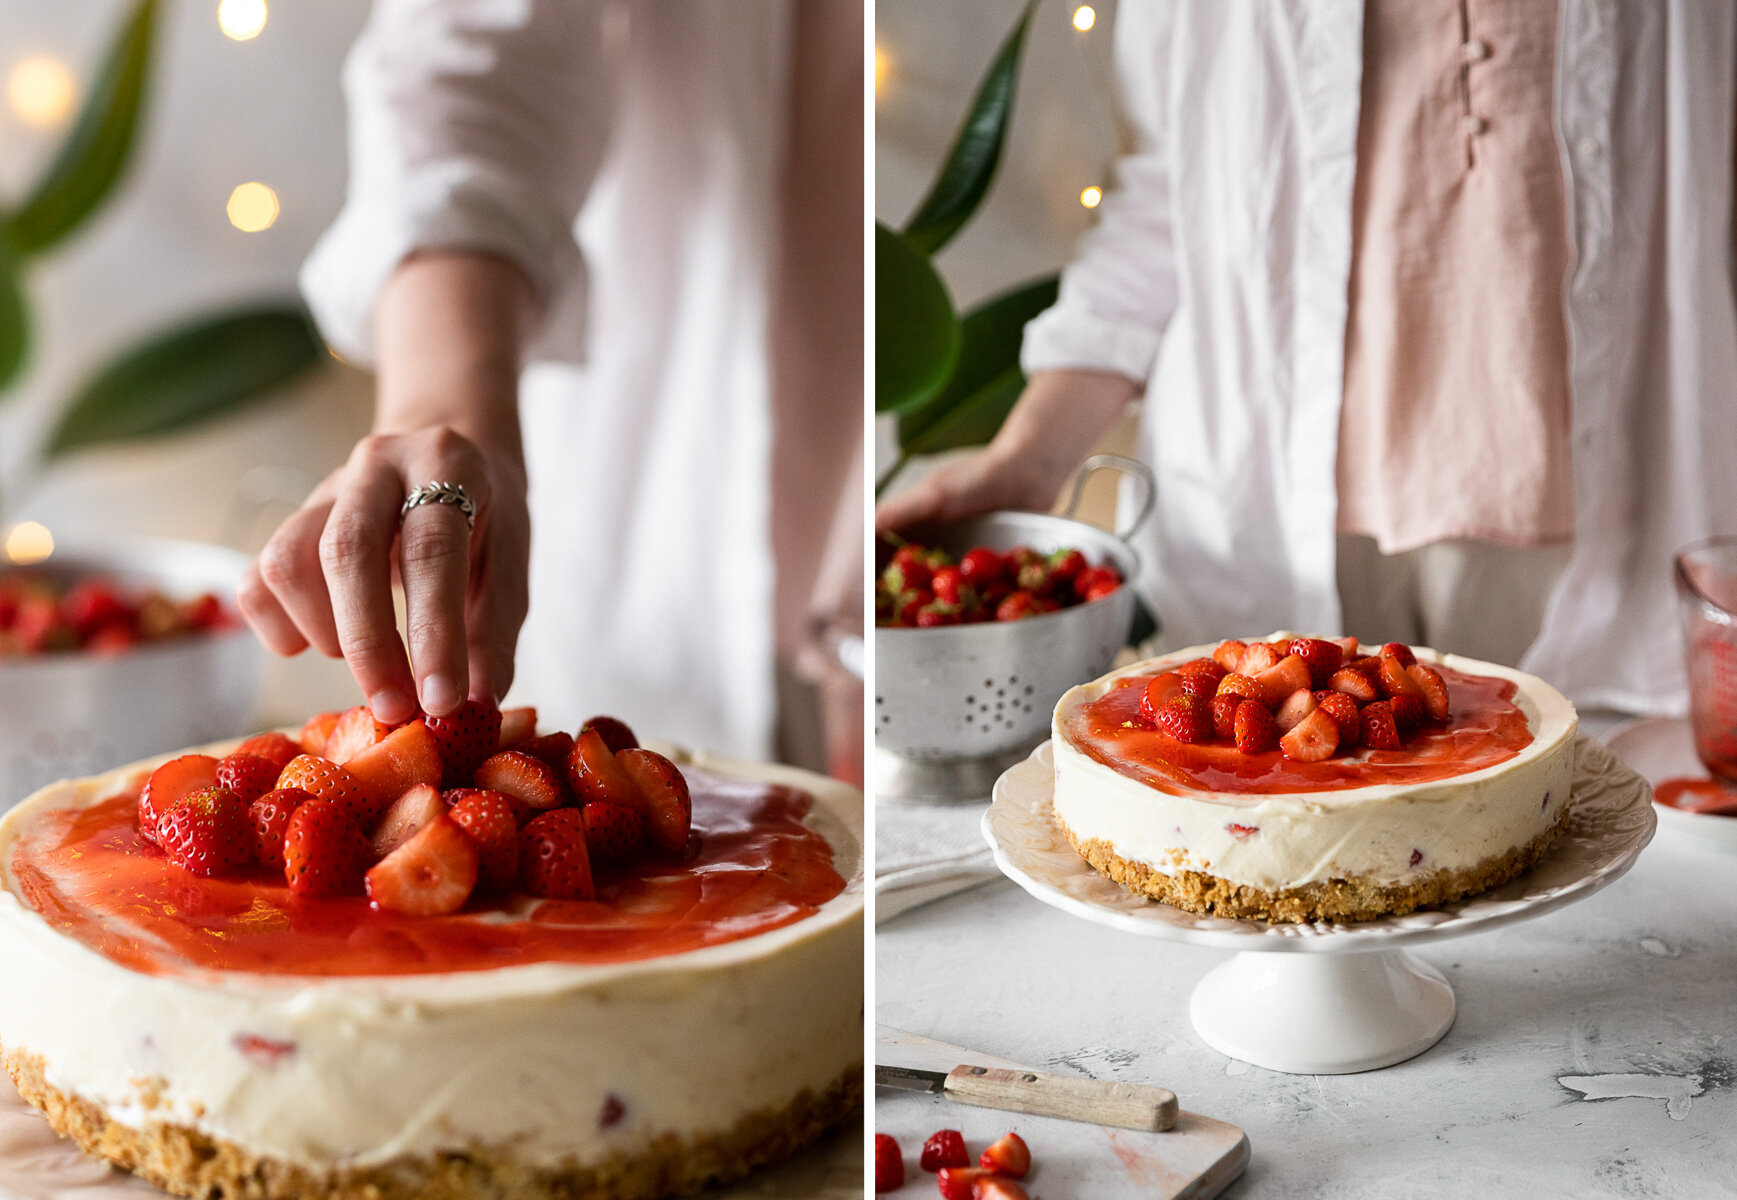 Capture Collect Photography - Hikaru Funnell - Foraged Strawberry Cheesecake - Food Photography - Mattes - 28-6-2020 - 16.jpg